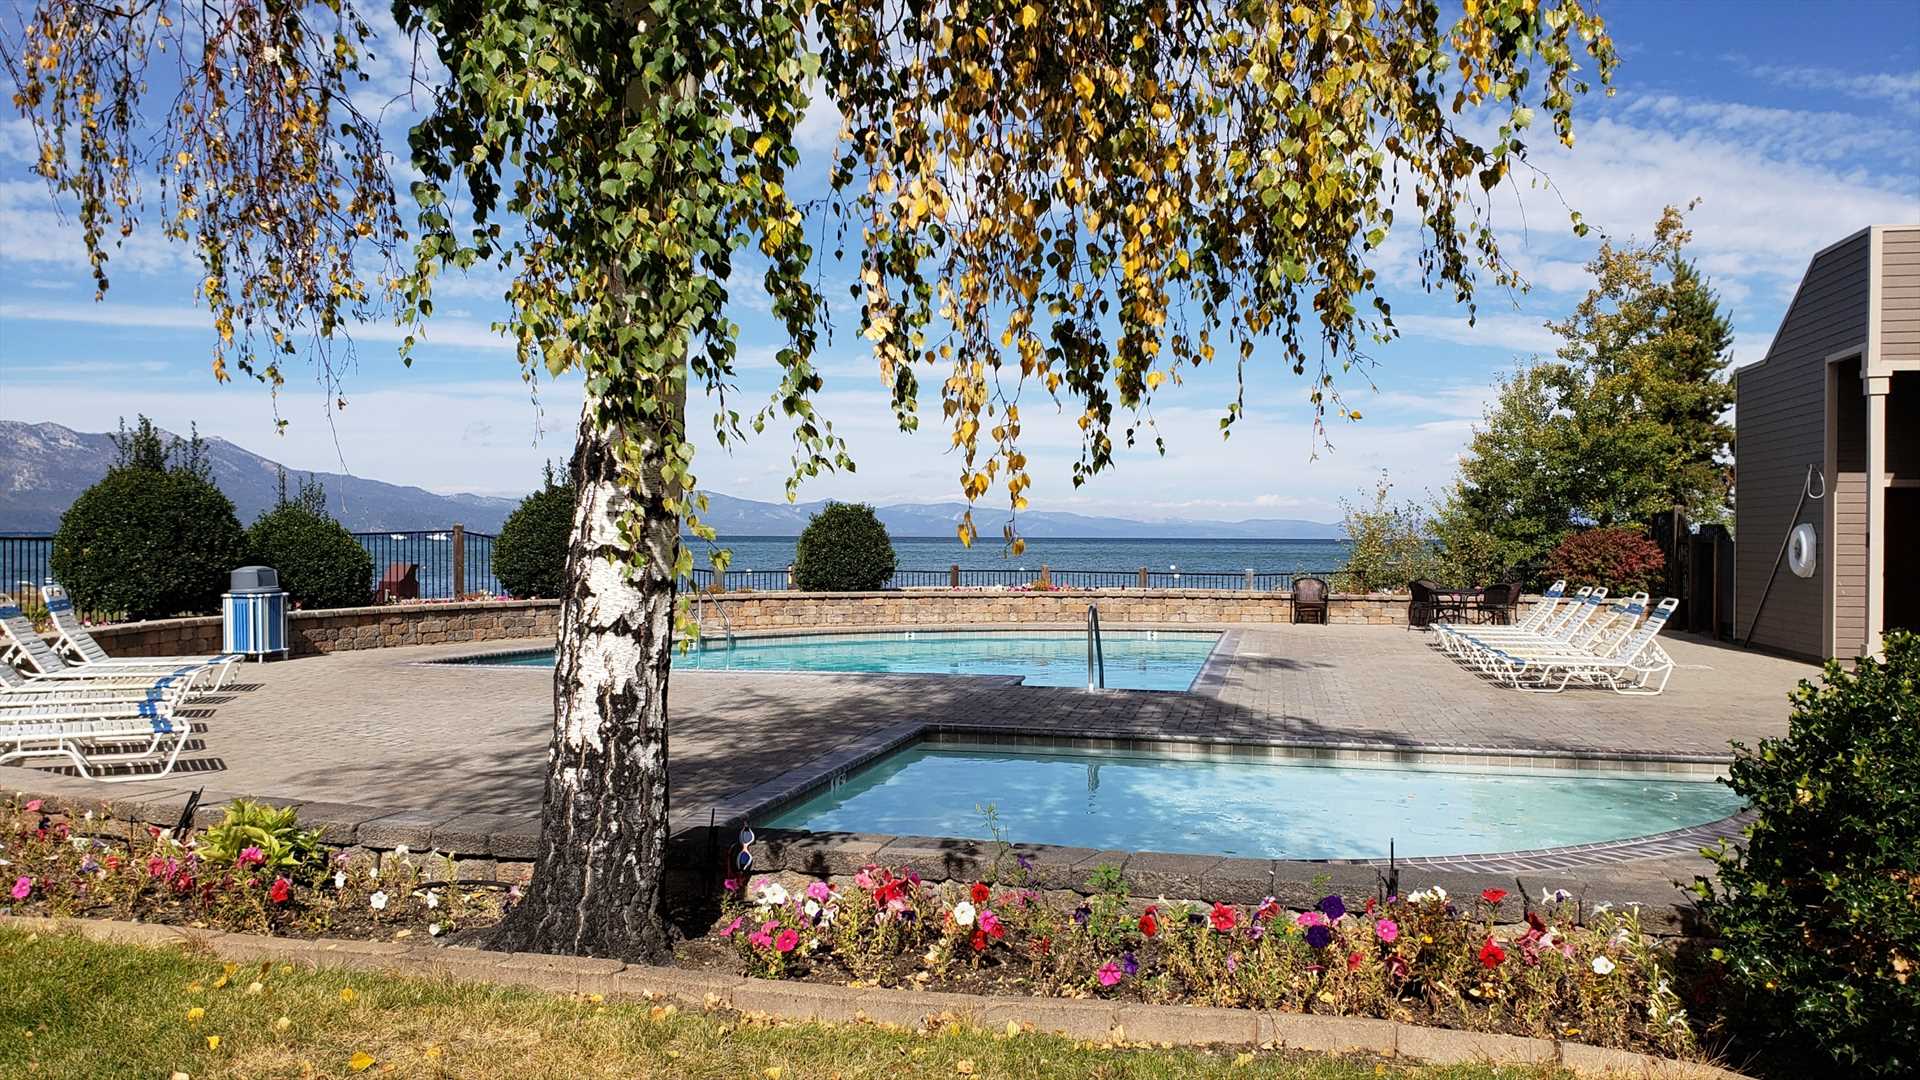 Pool and Jacuzzi near the lake. There are 3 pools and 2 jacu